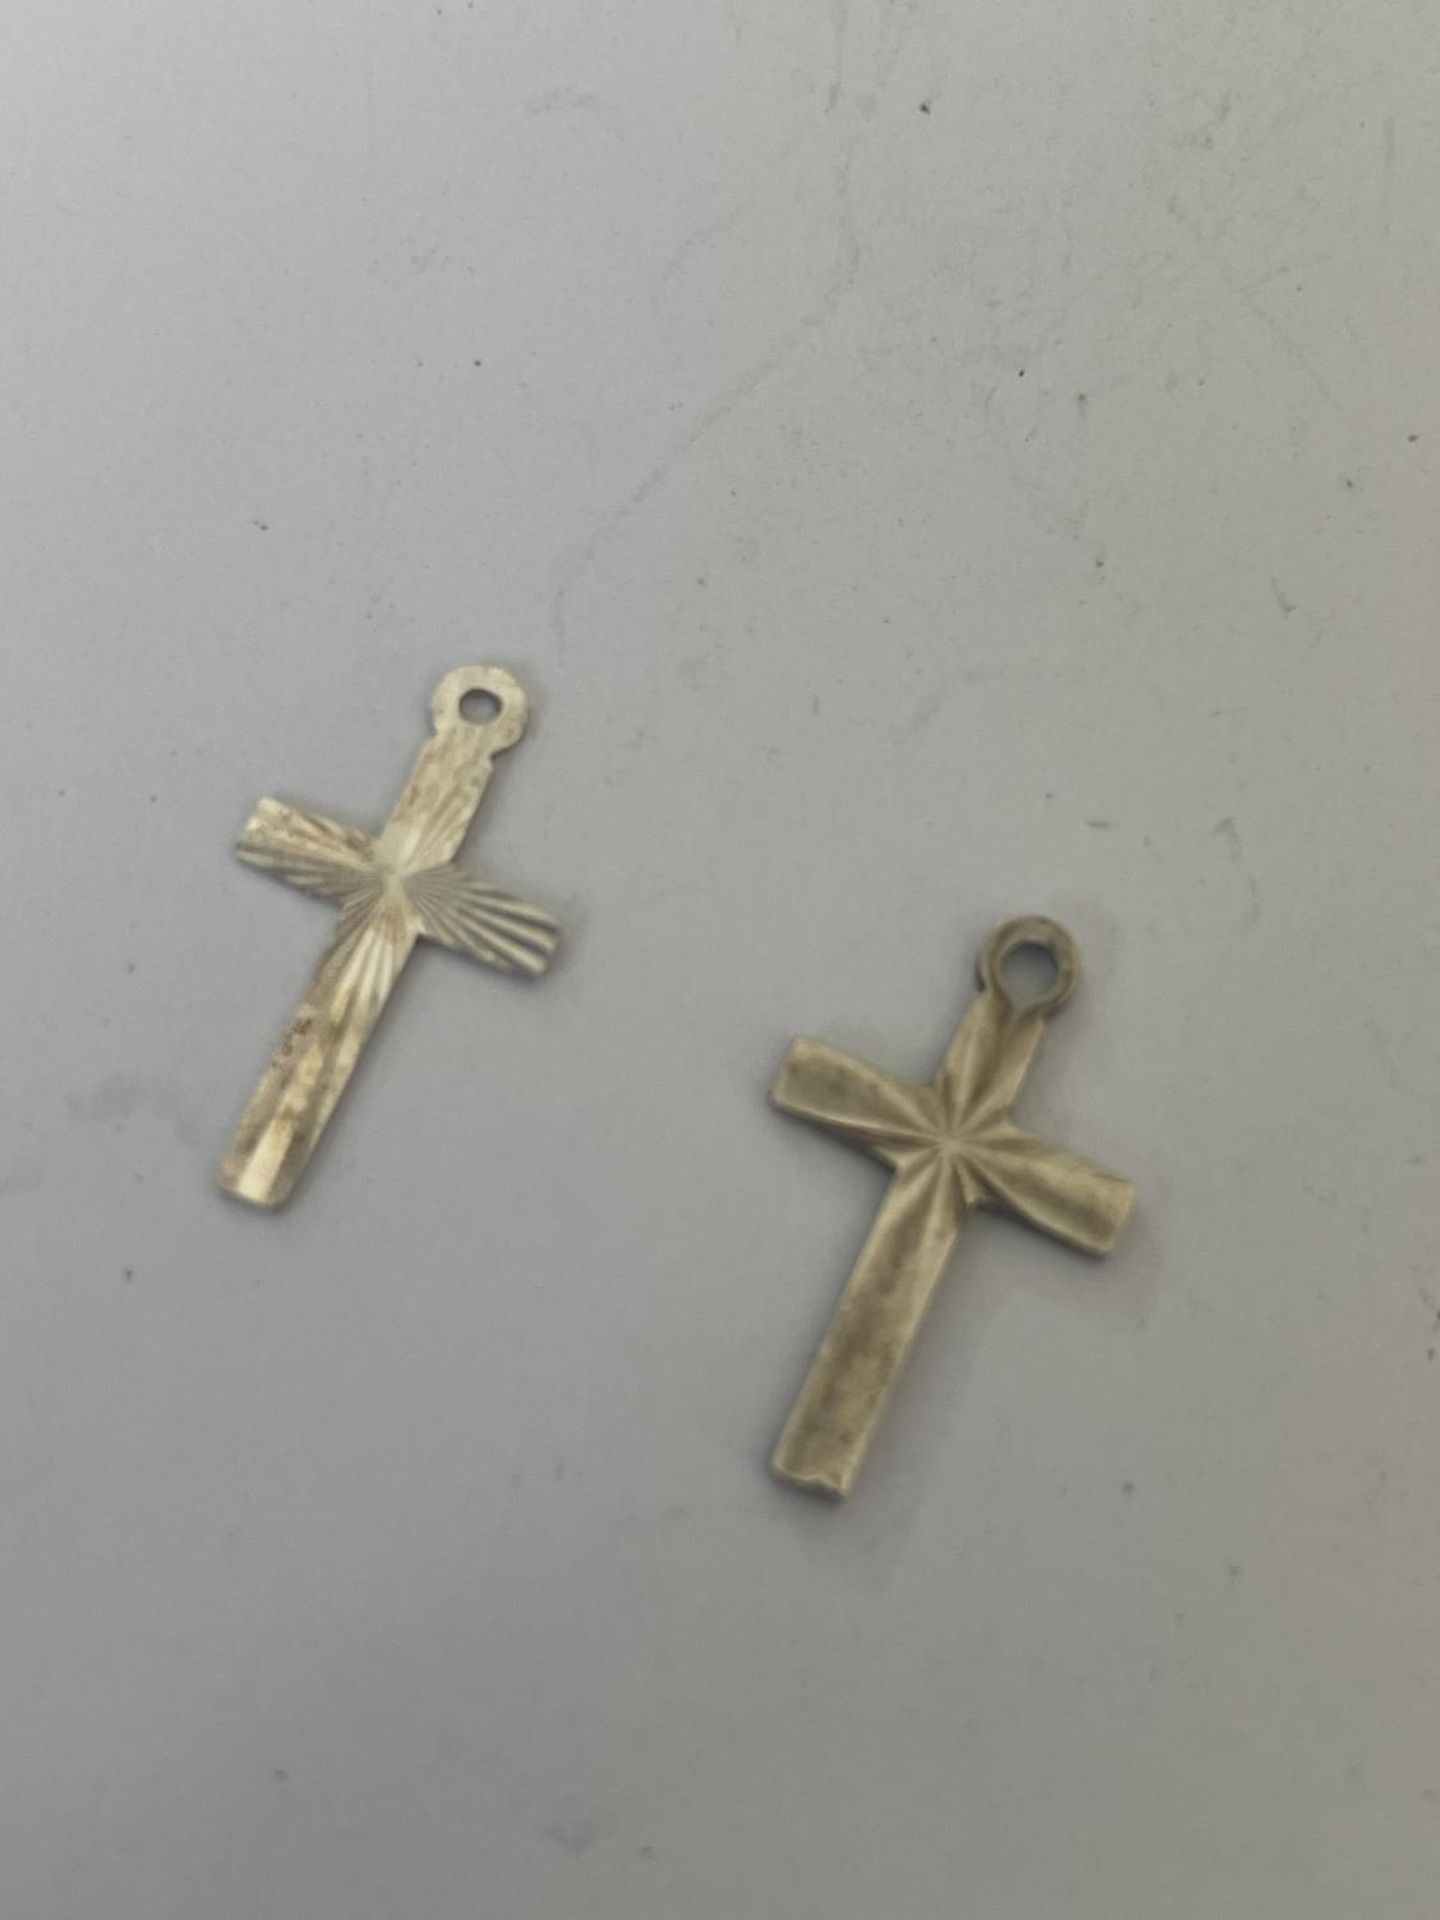 FIVE SILVER CROSSES - Image 3 of 3